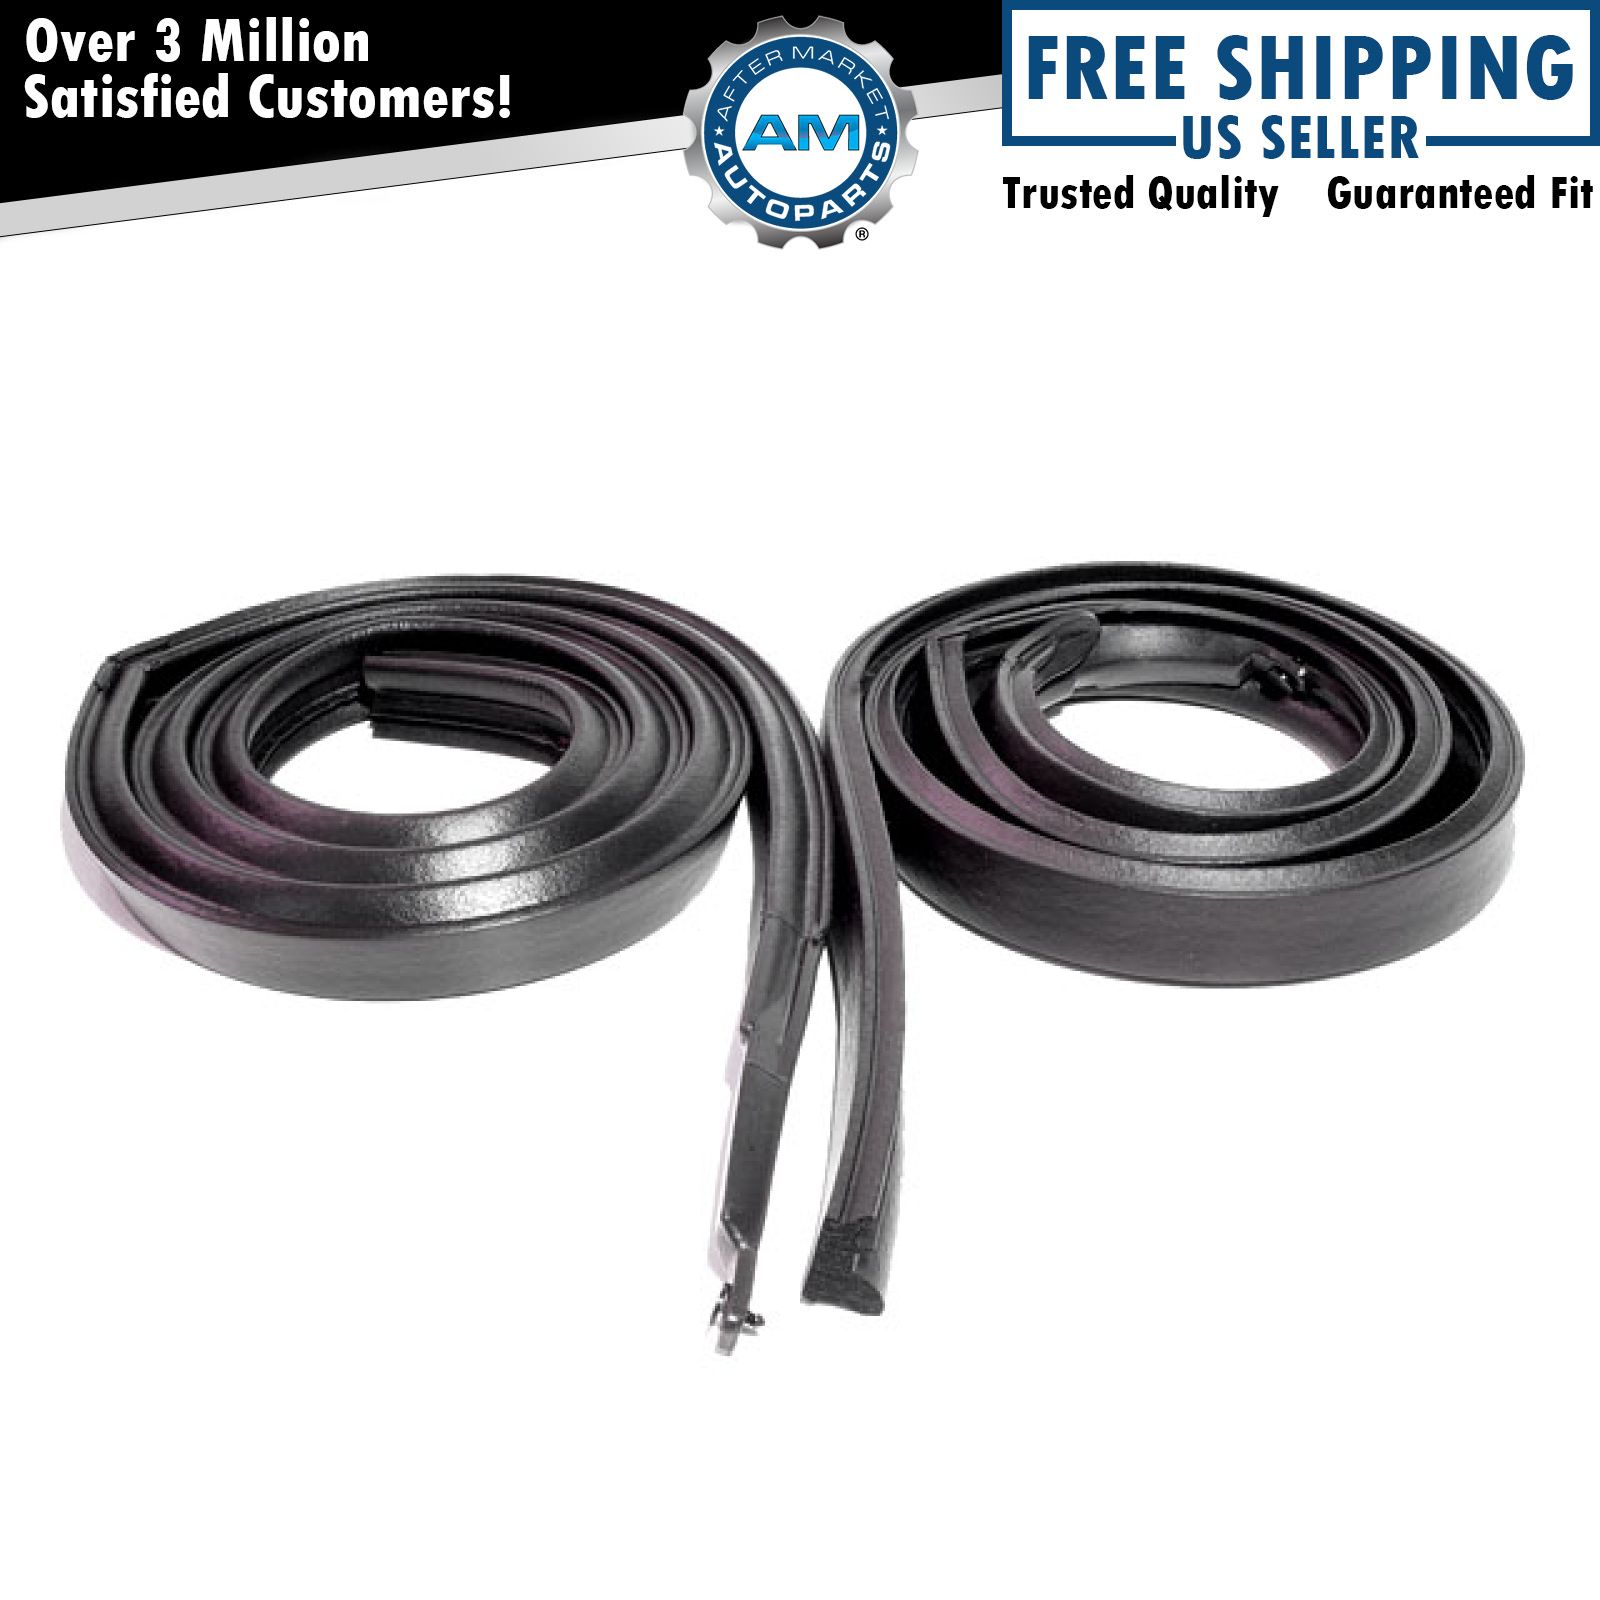 Rubber Weatherstrip Roofrail Seals Pair Set for 65-66 Chevy Impala 4 Dr Hardtop